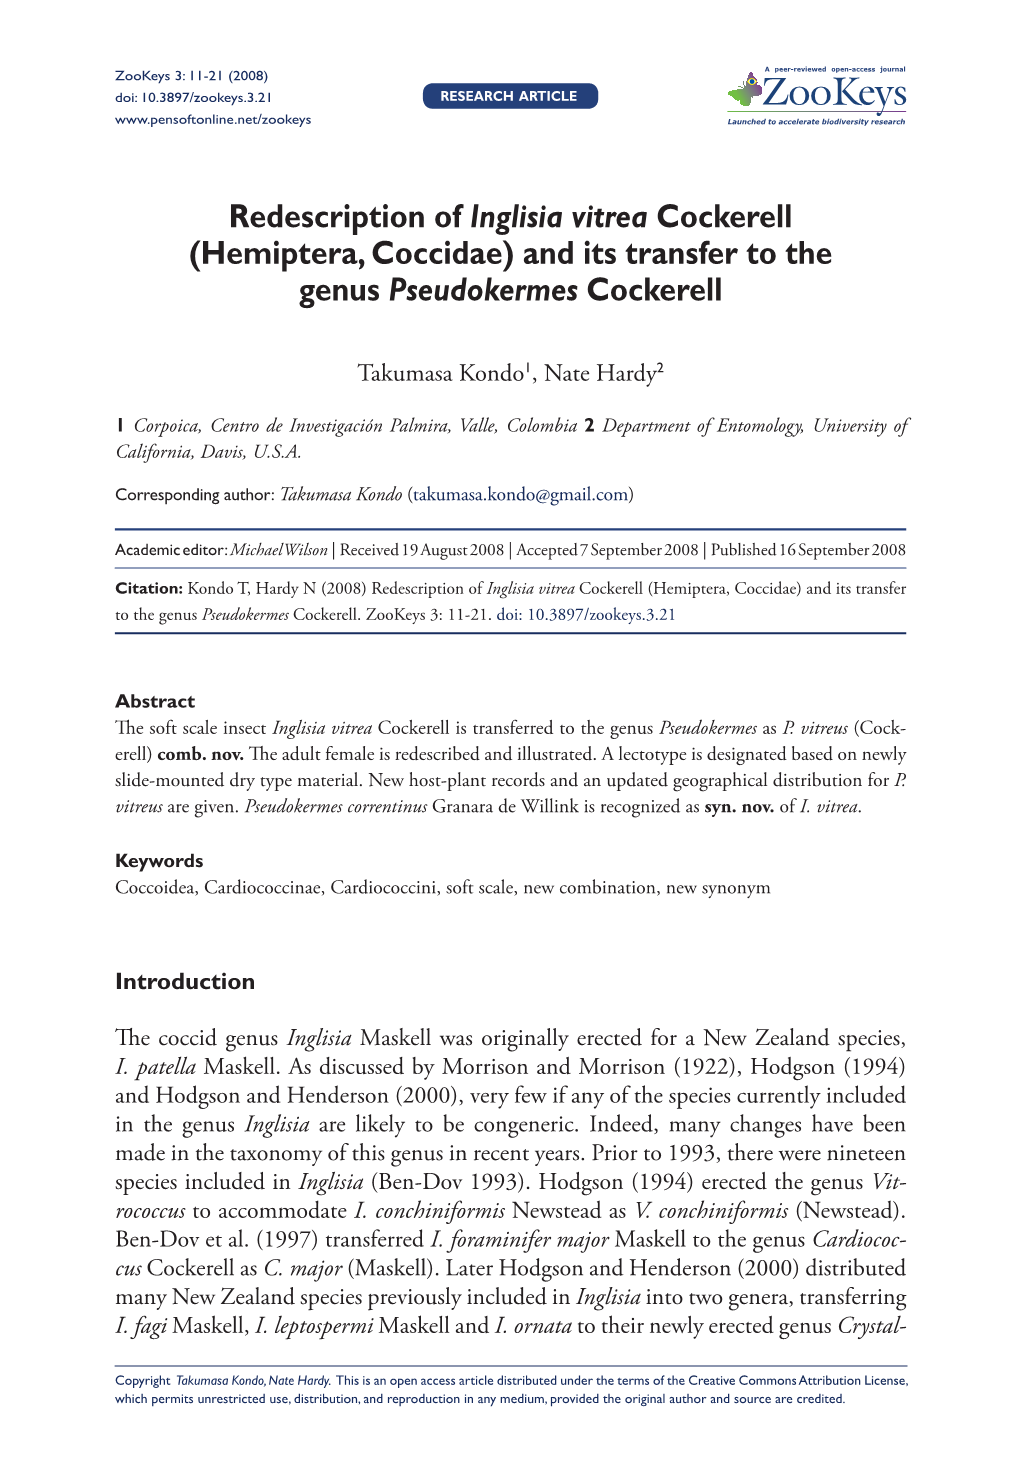 Hemiptera, Coccidae) and Its Transfer to the Genus Pseudokermes Cockerell